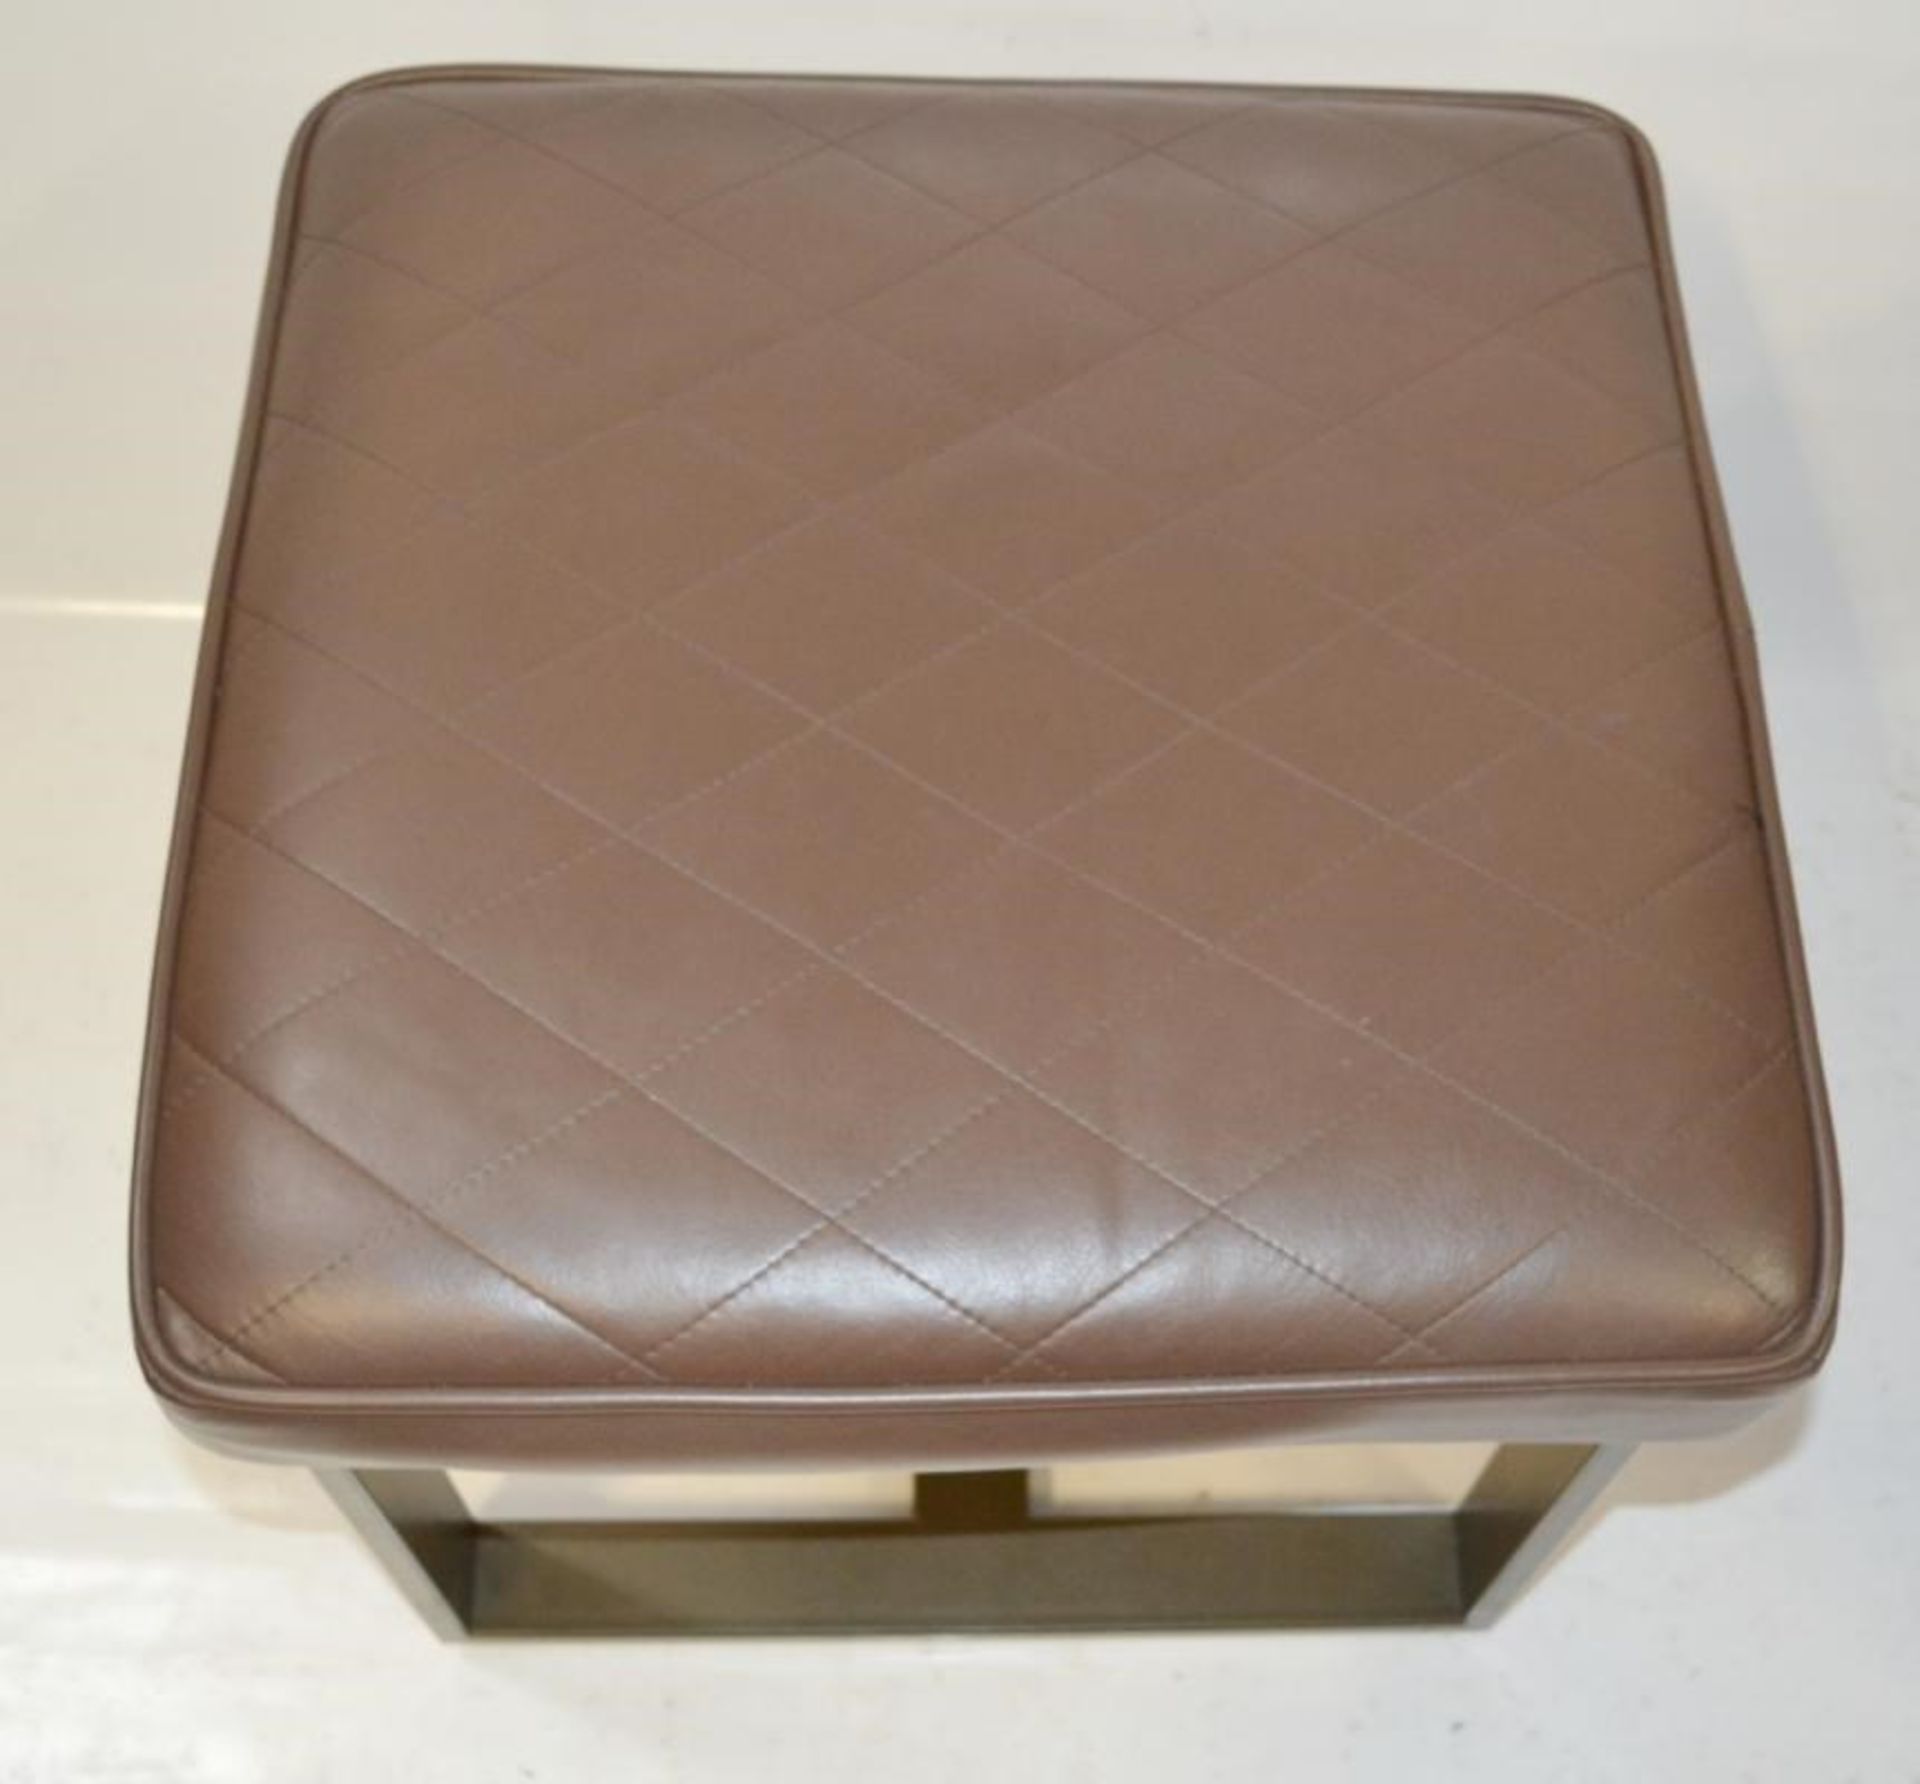 2 x Contemporary Seat Stools With Brown Faux Leather Cushioned Seat Pads - Image 5 of 5